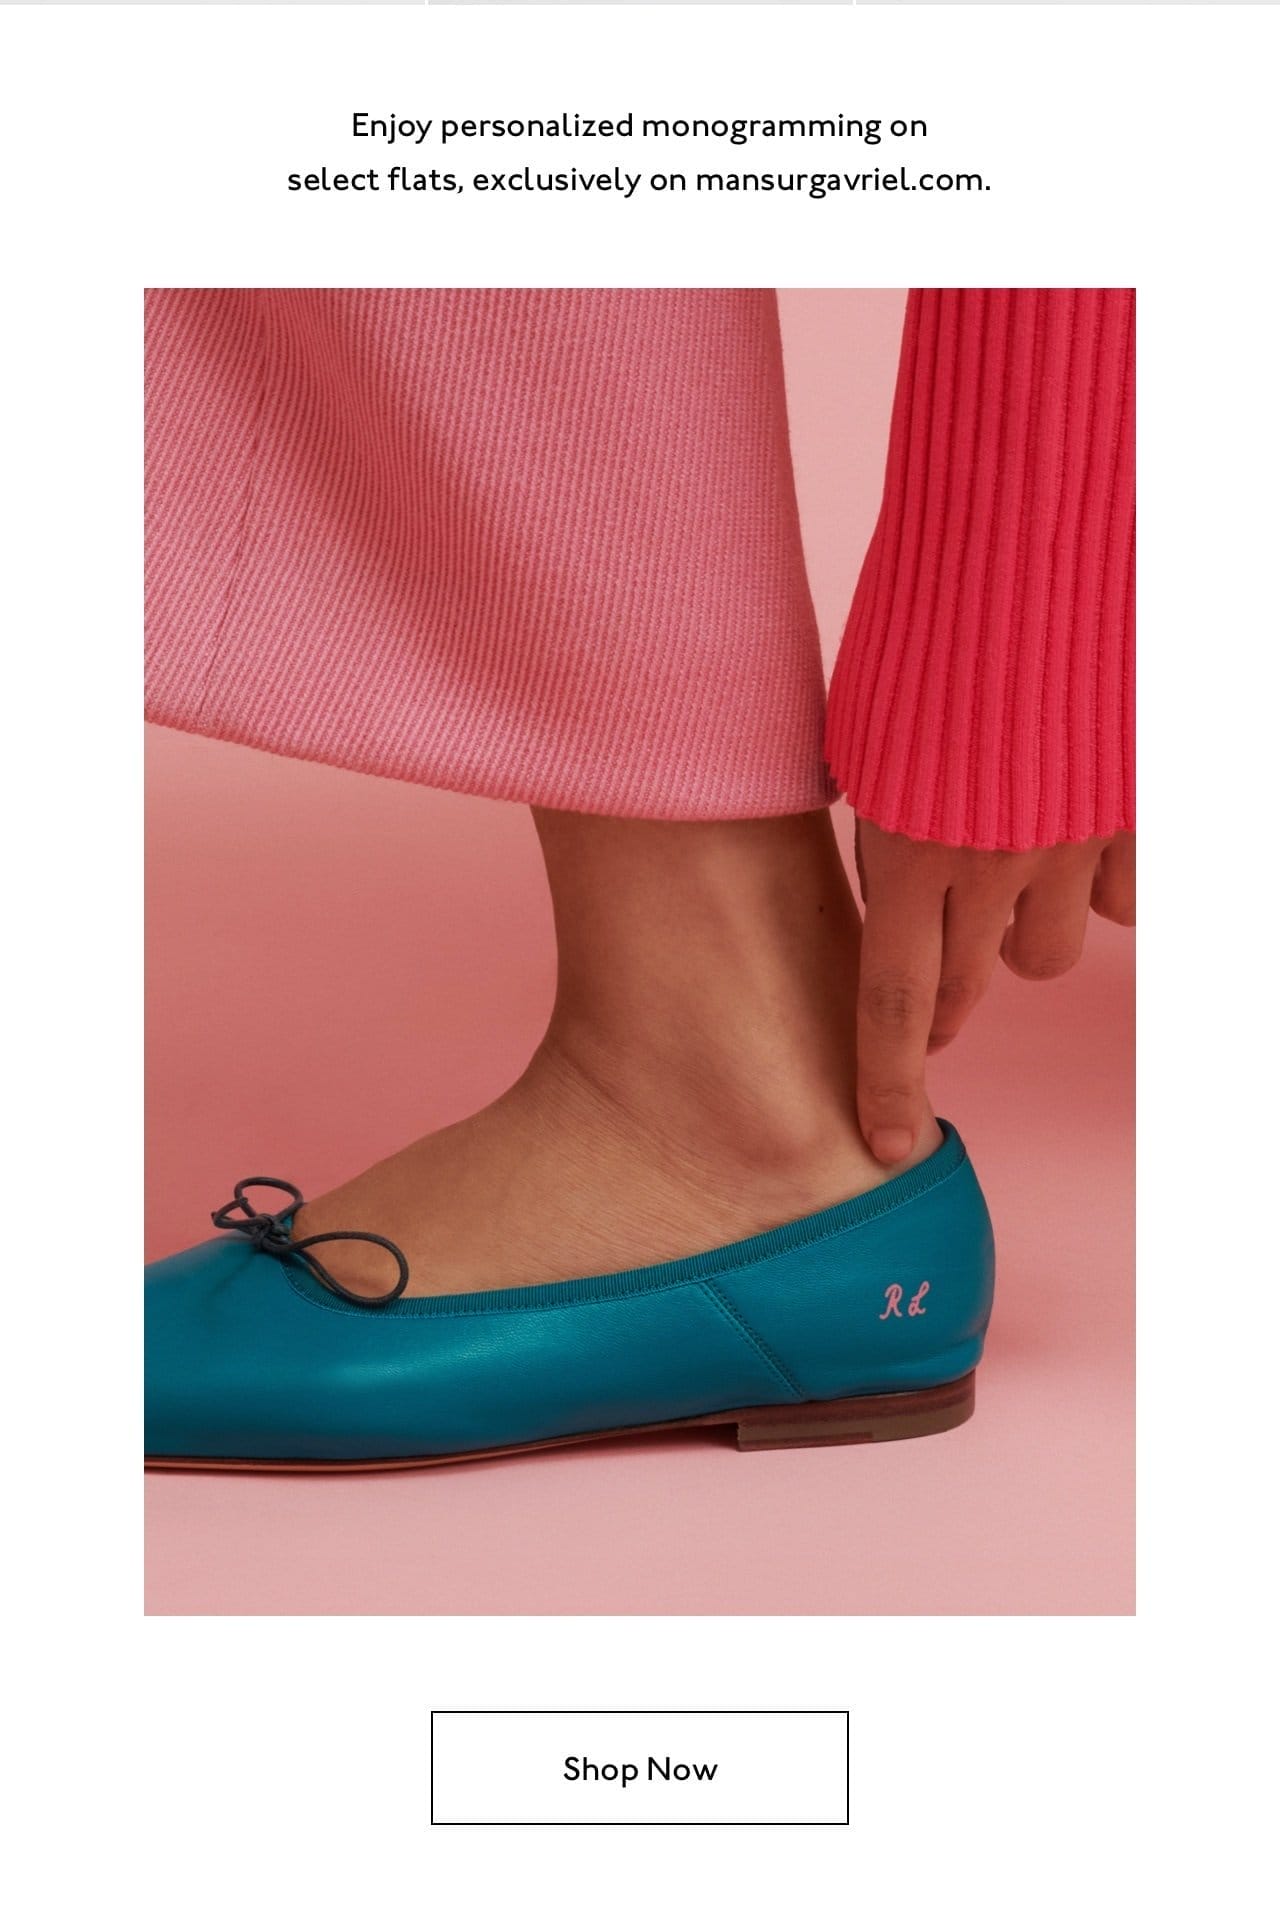 Enjoy personalized monogramming on select flats, exclusively on mansurgavriel.com.